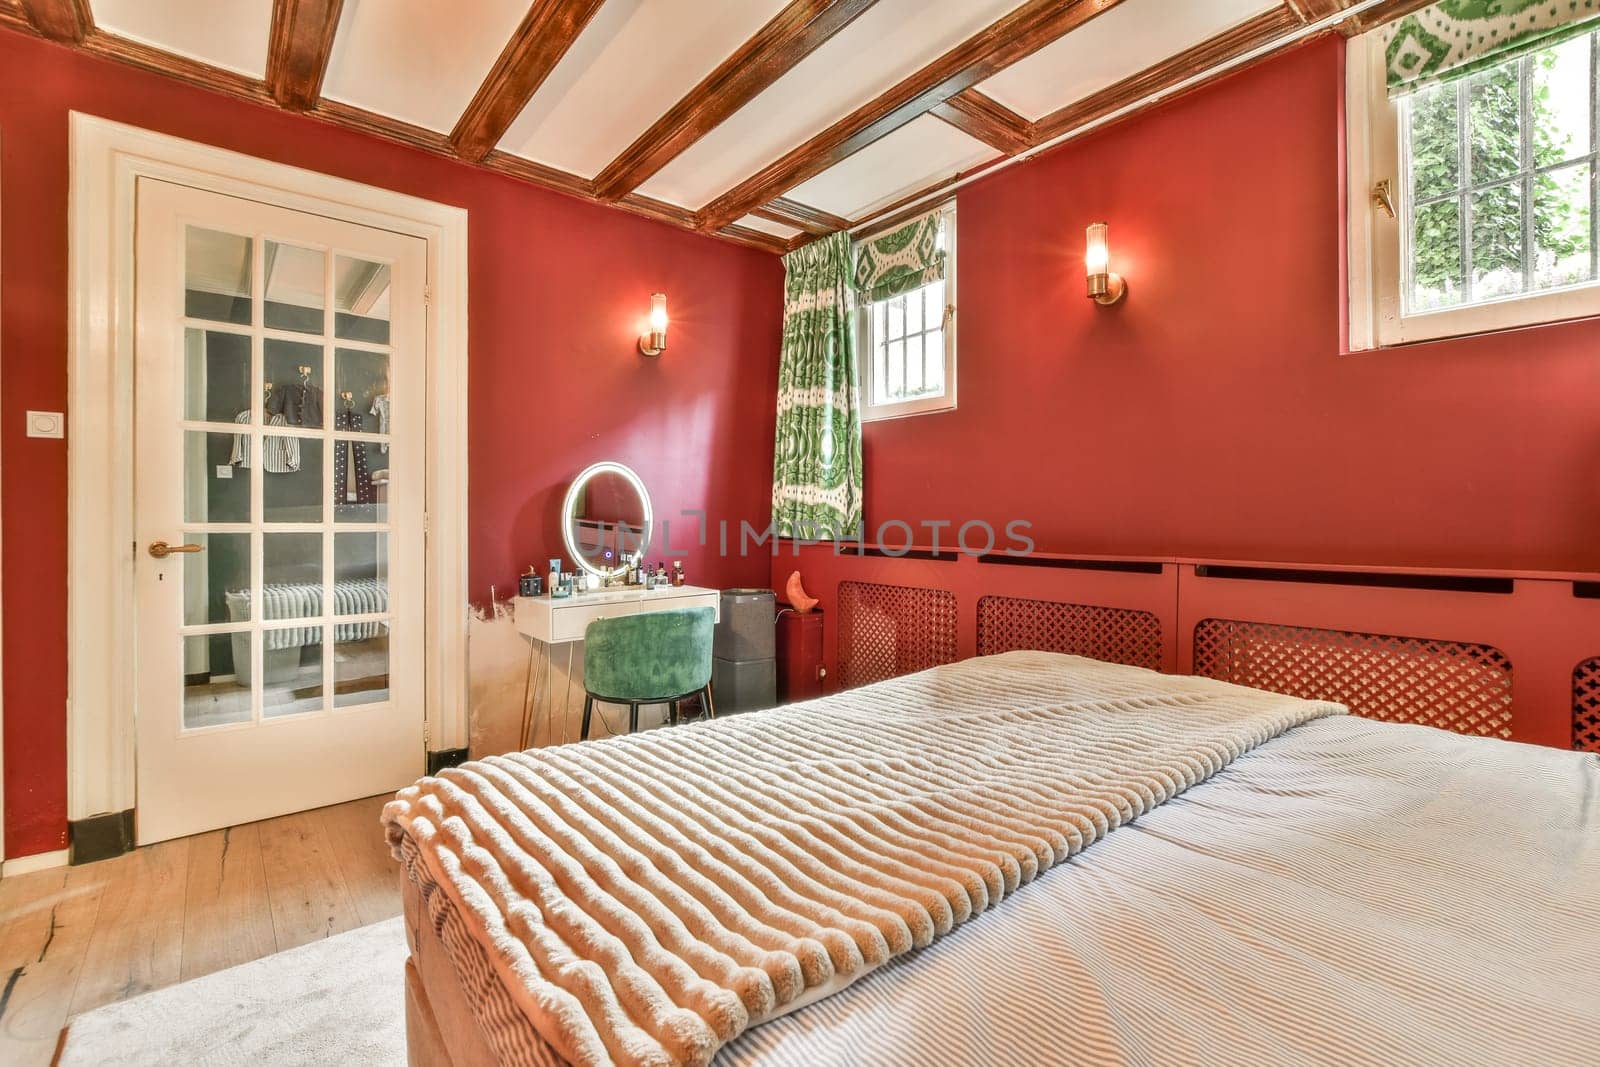 a bed in a room with red walls and wood beams on the ceiling, there is a mirror hanging above it